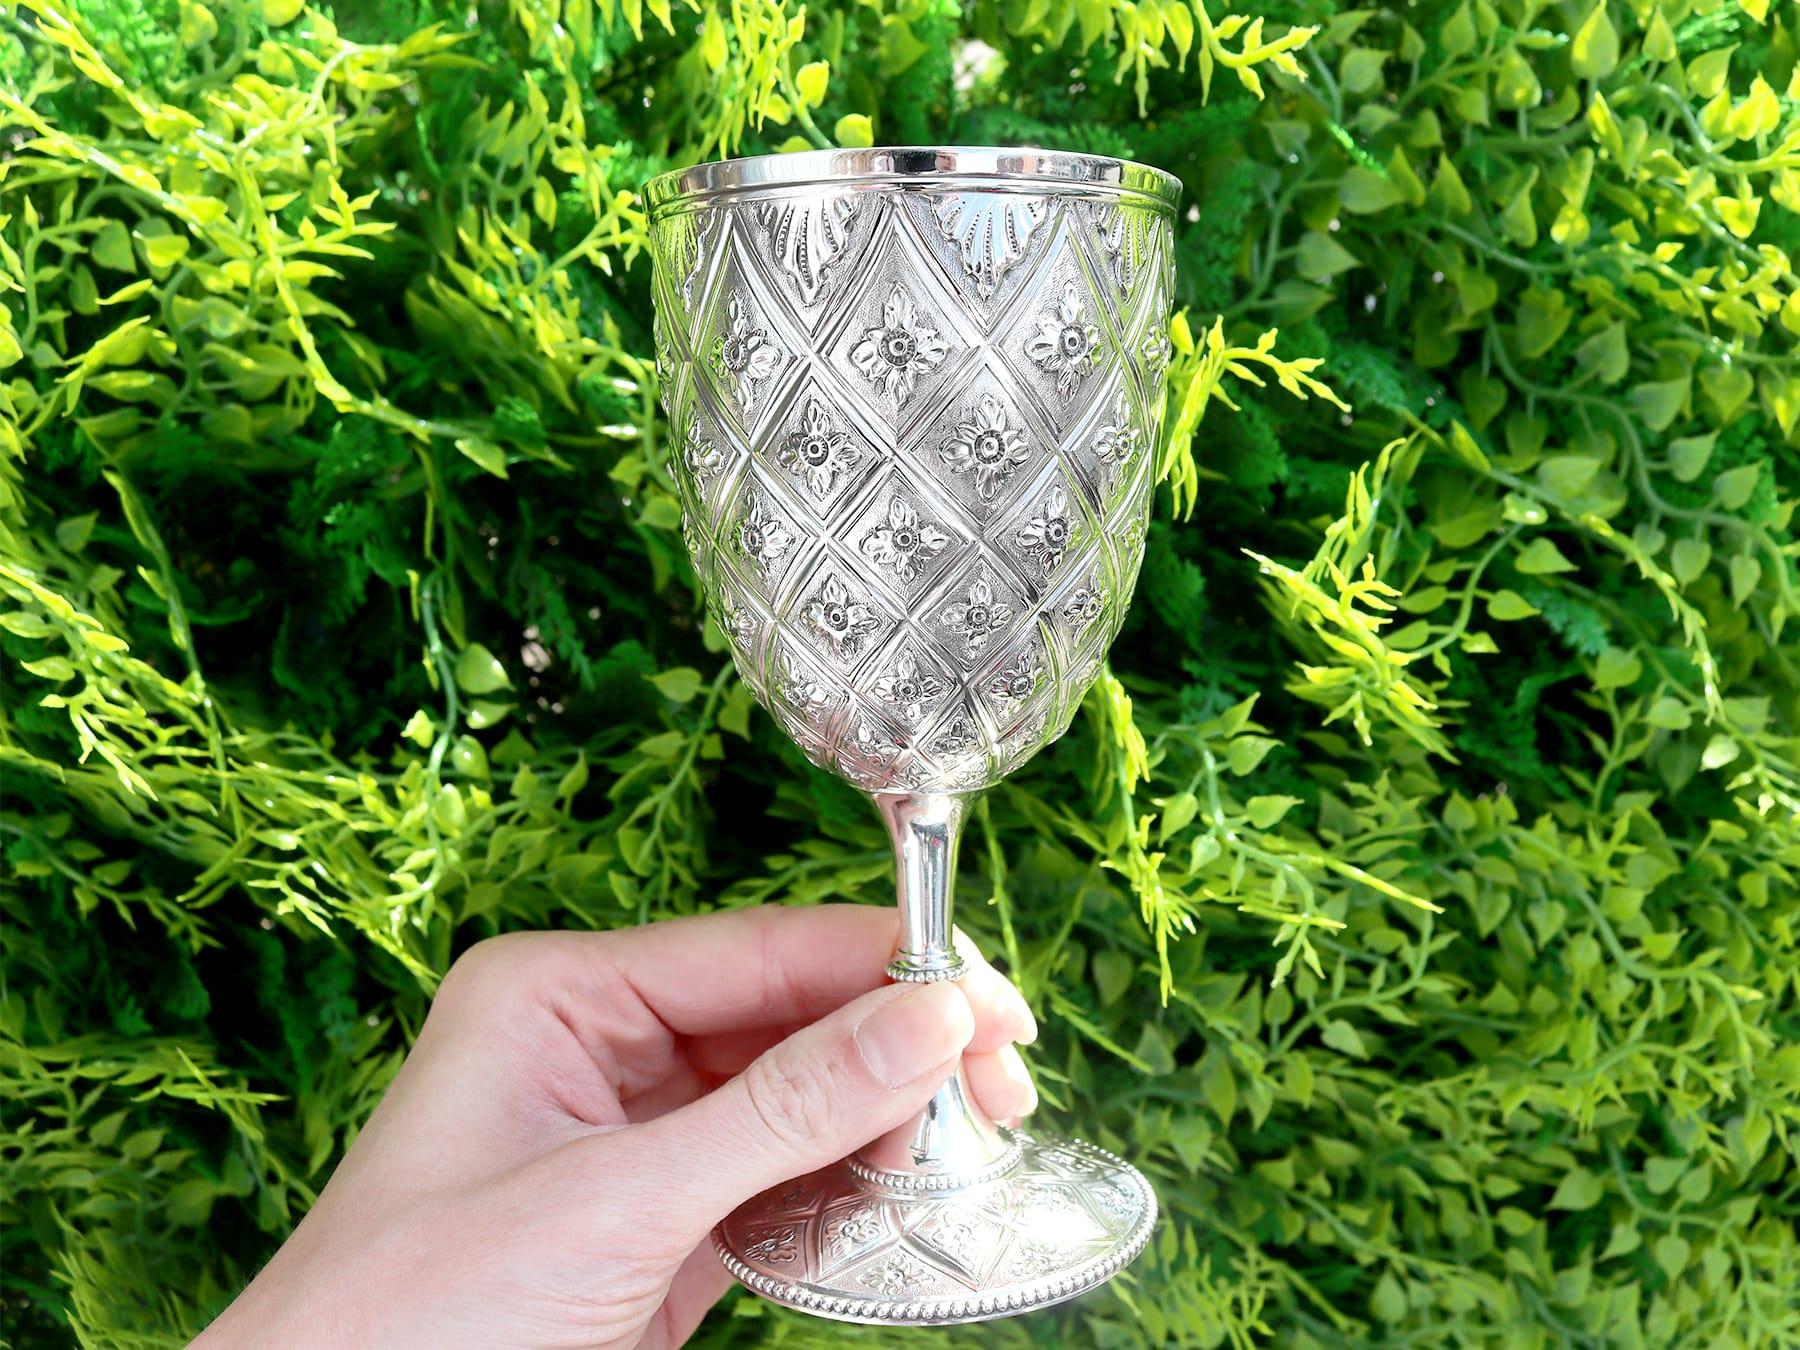 This exceptional antique Victorian sterling silver goblet has a circular bell shaped form onto a knopped pedestal and circular spreading foot, in the Classic pineapple style.

The body of this impressive 19th century wine goblet is composed of